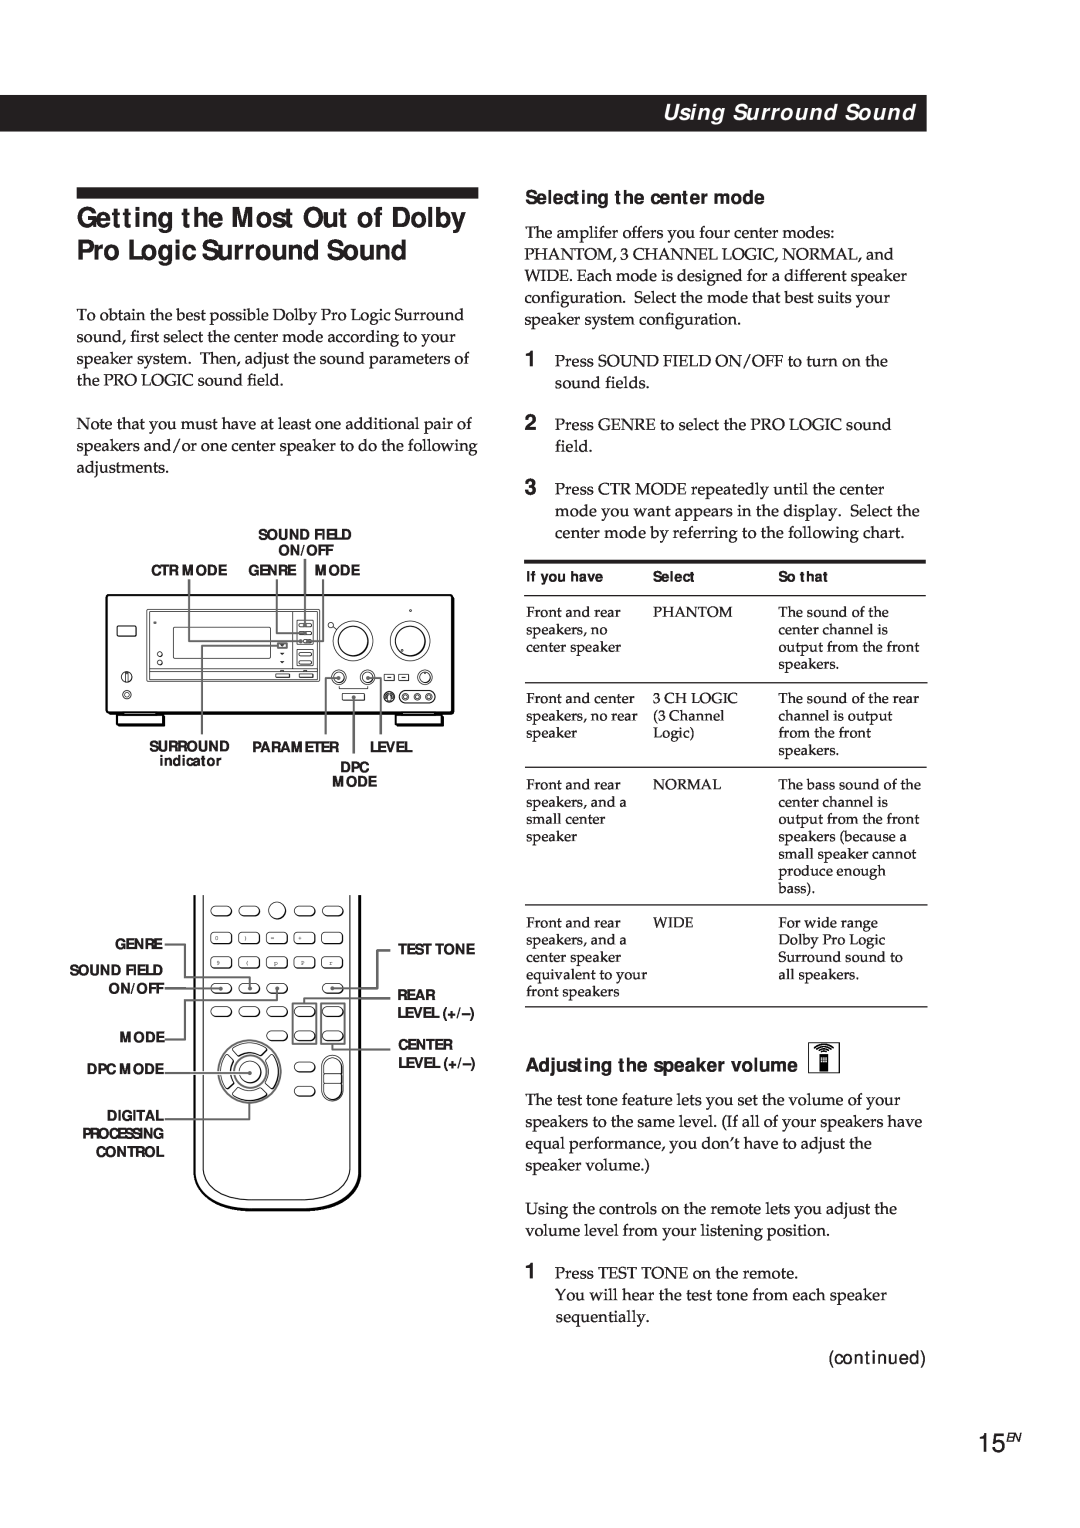 Sony TA-VA8ES 15EN, Selecting the center mode, Adjusting the speaker volume, If you have, So that, Using Surround Sound 